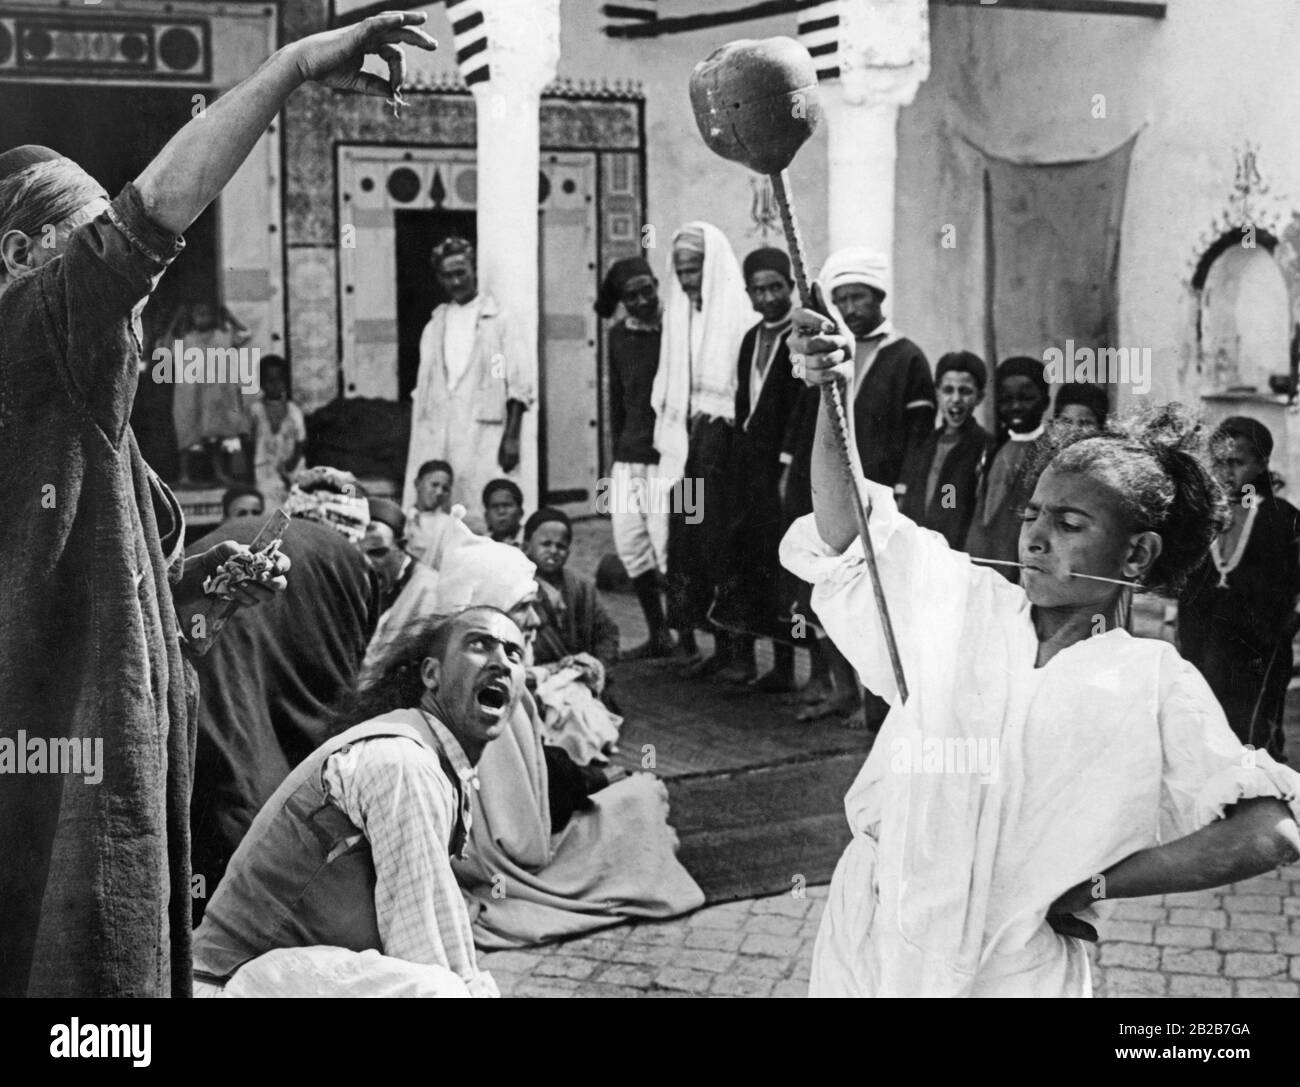 Street performers in Tunis. Undated photo. Stock Photo